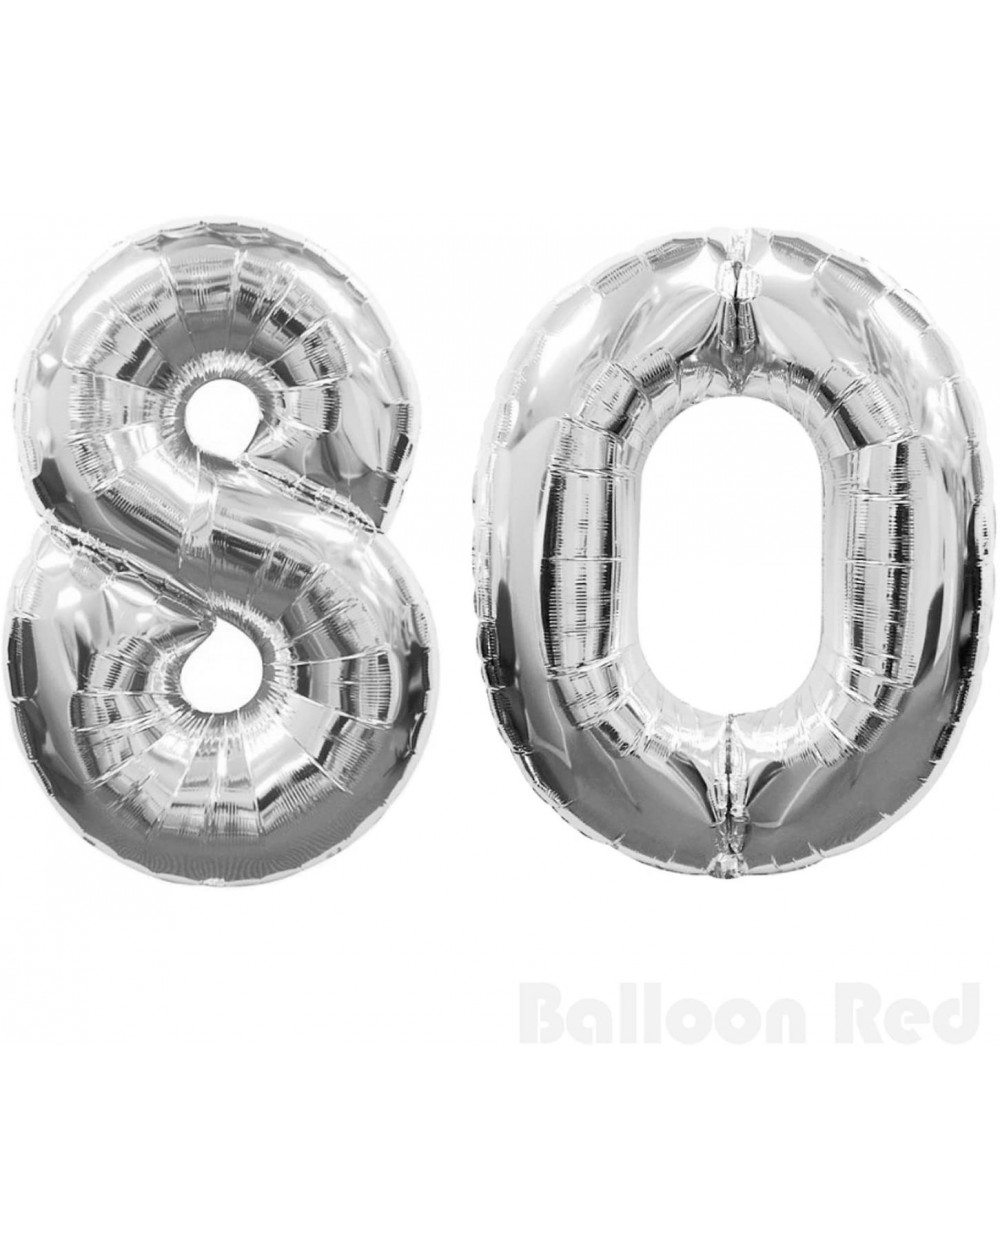 Balloons Number 80 Giant Jumbo Helium Foil Mylar Balloons- 40 Inch- Glossy Silver- Premium Quality- for 80th Birthday Party -...